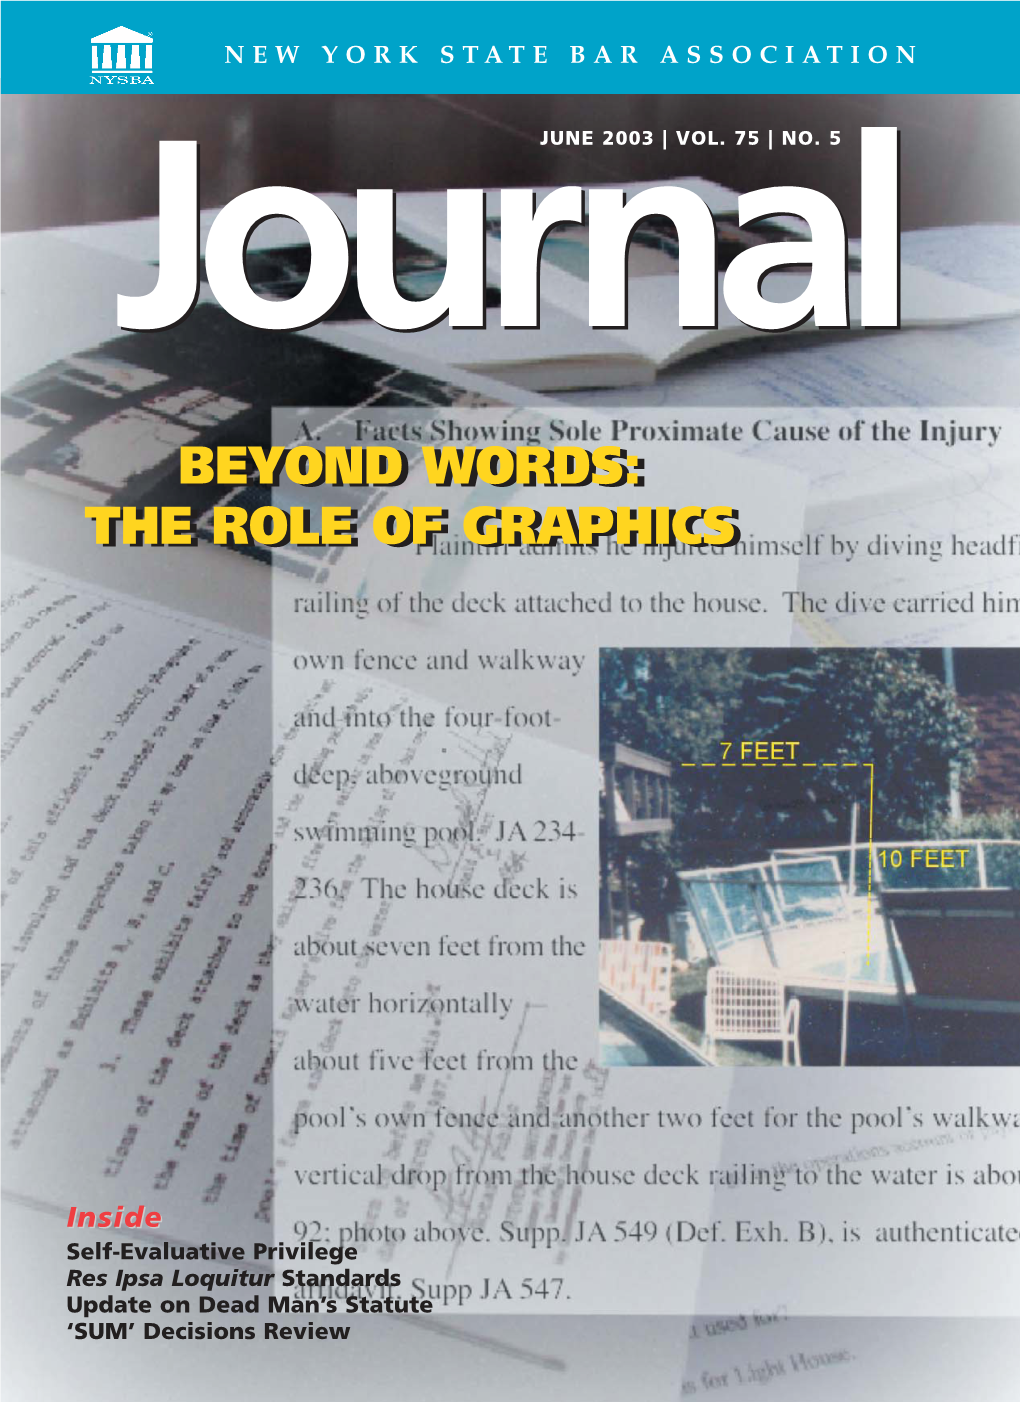 The Role of Graphics